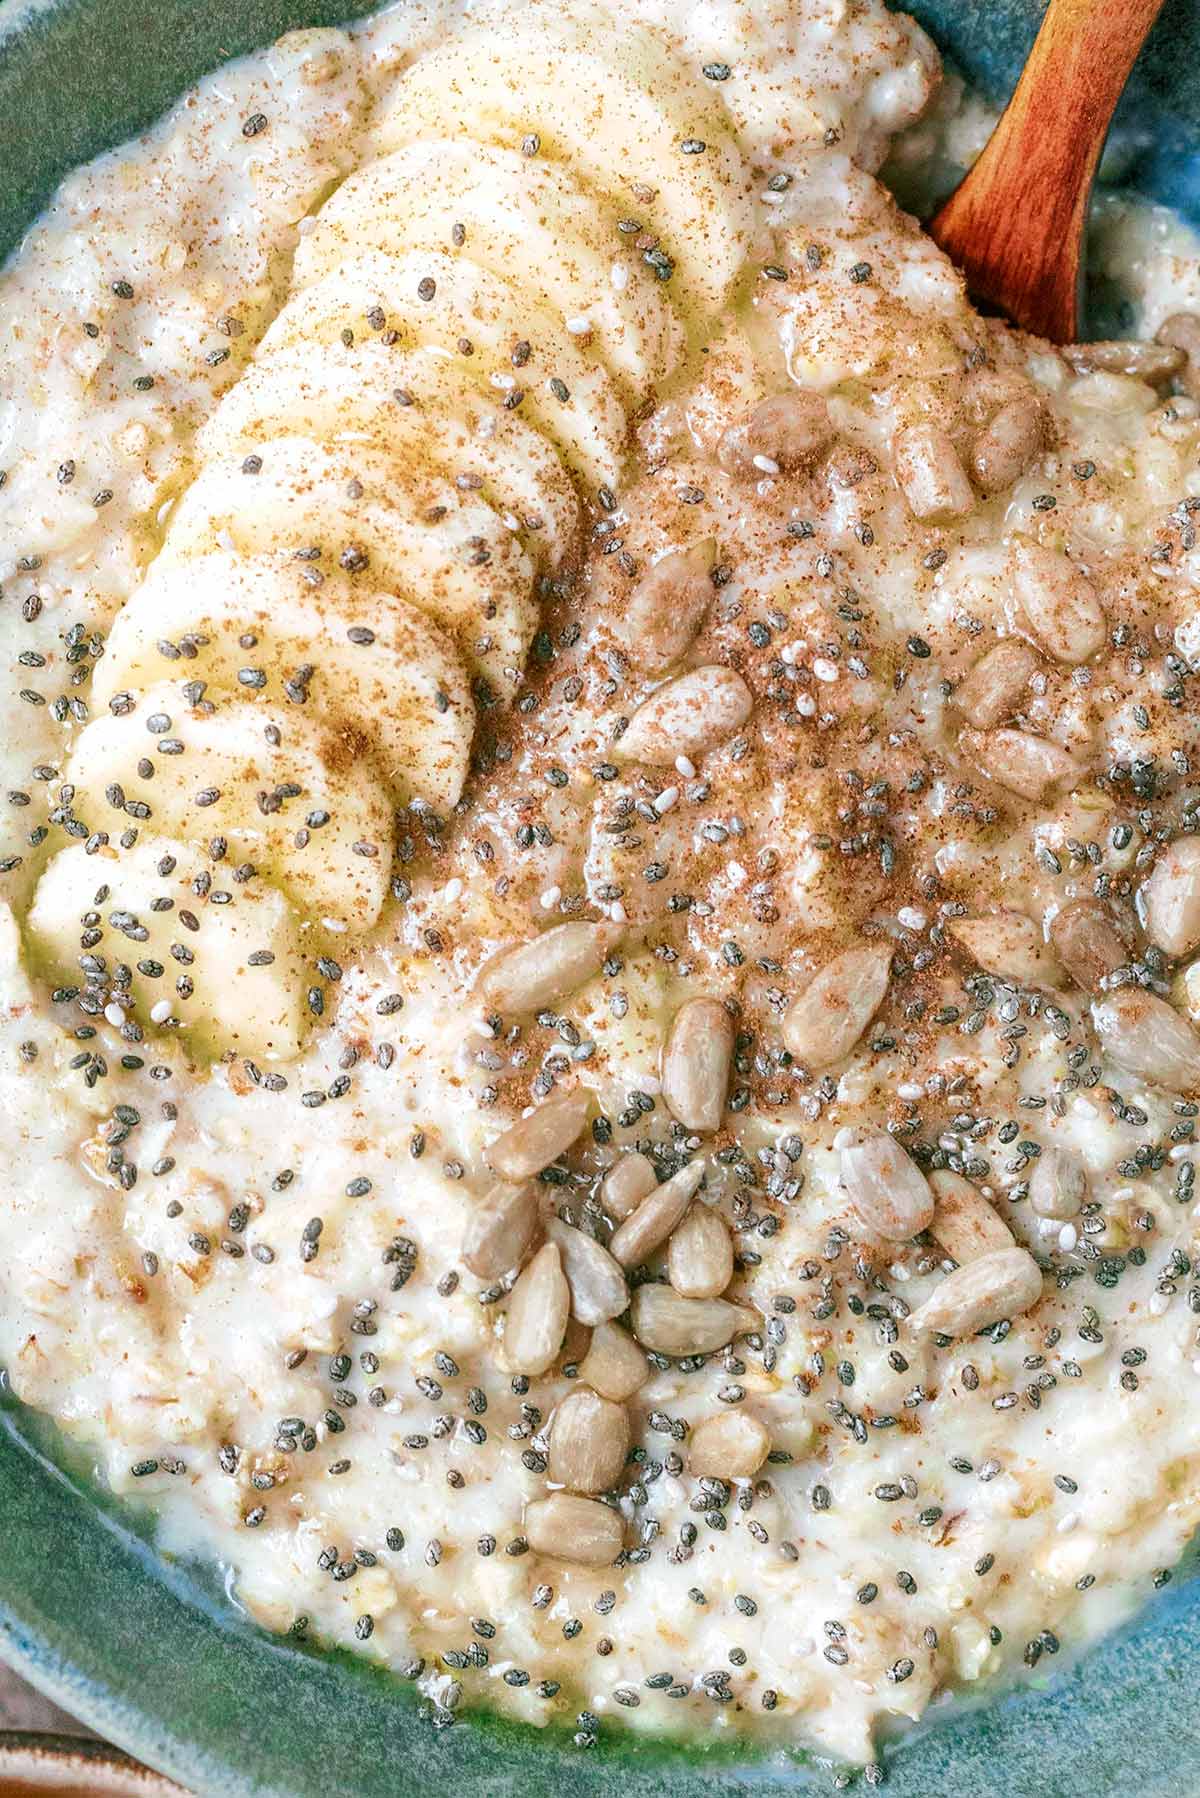 Slices of banana and seeds on top of cooked porridge.